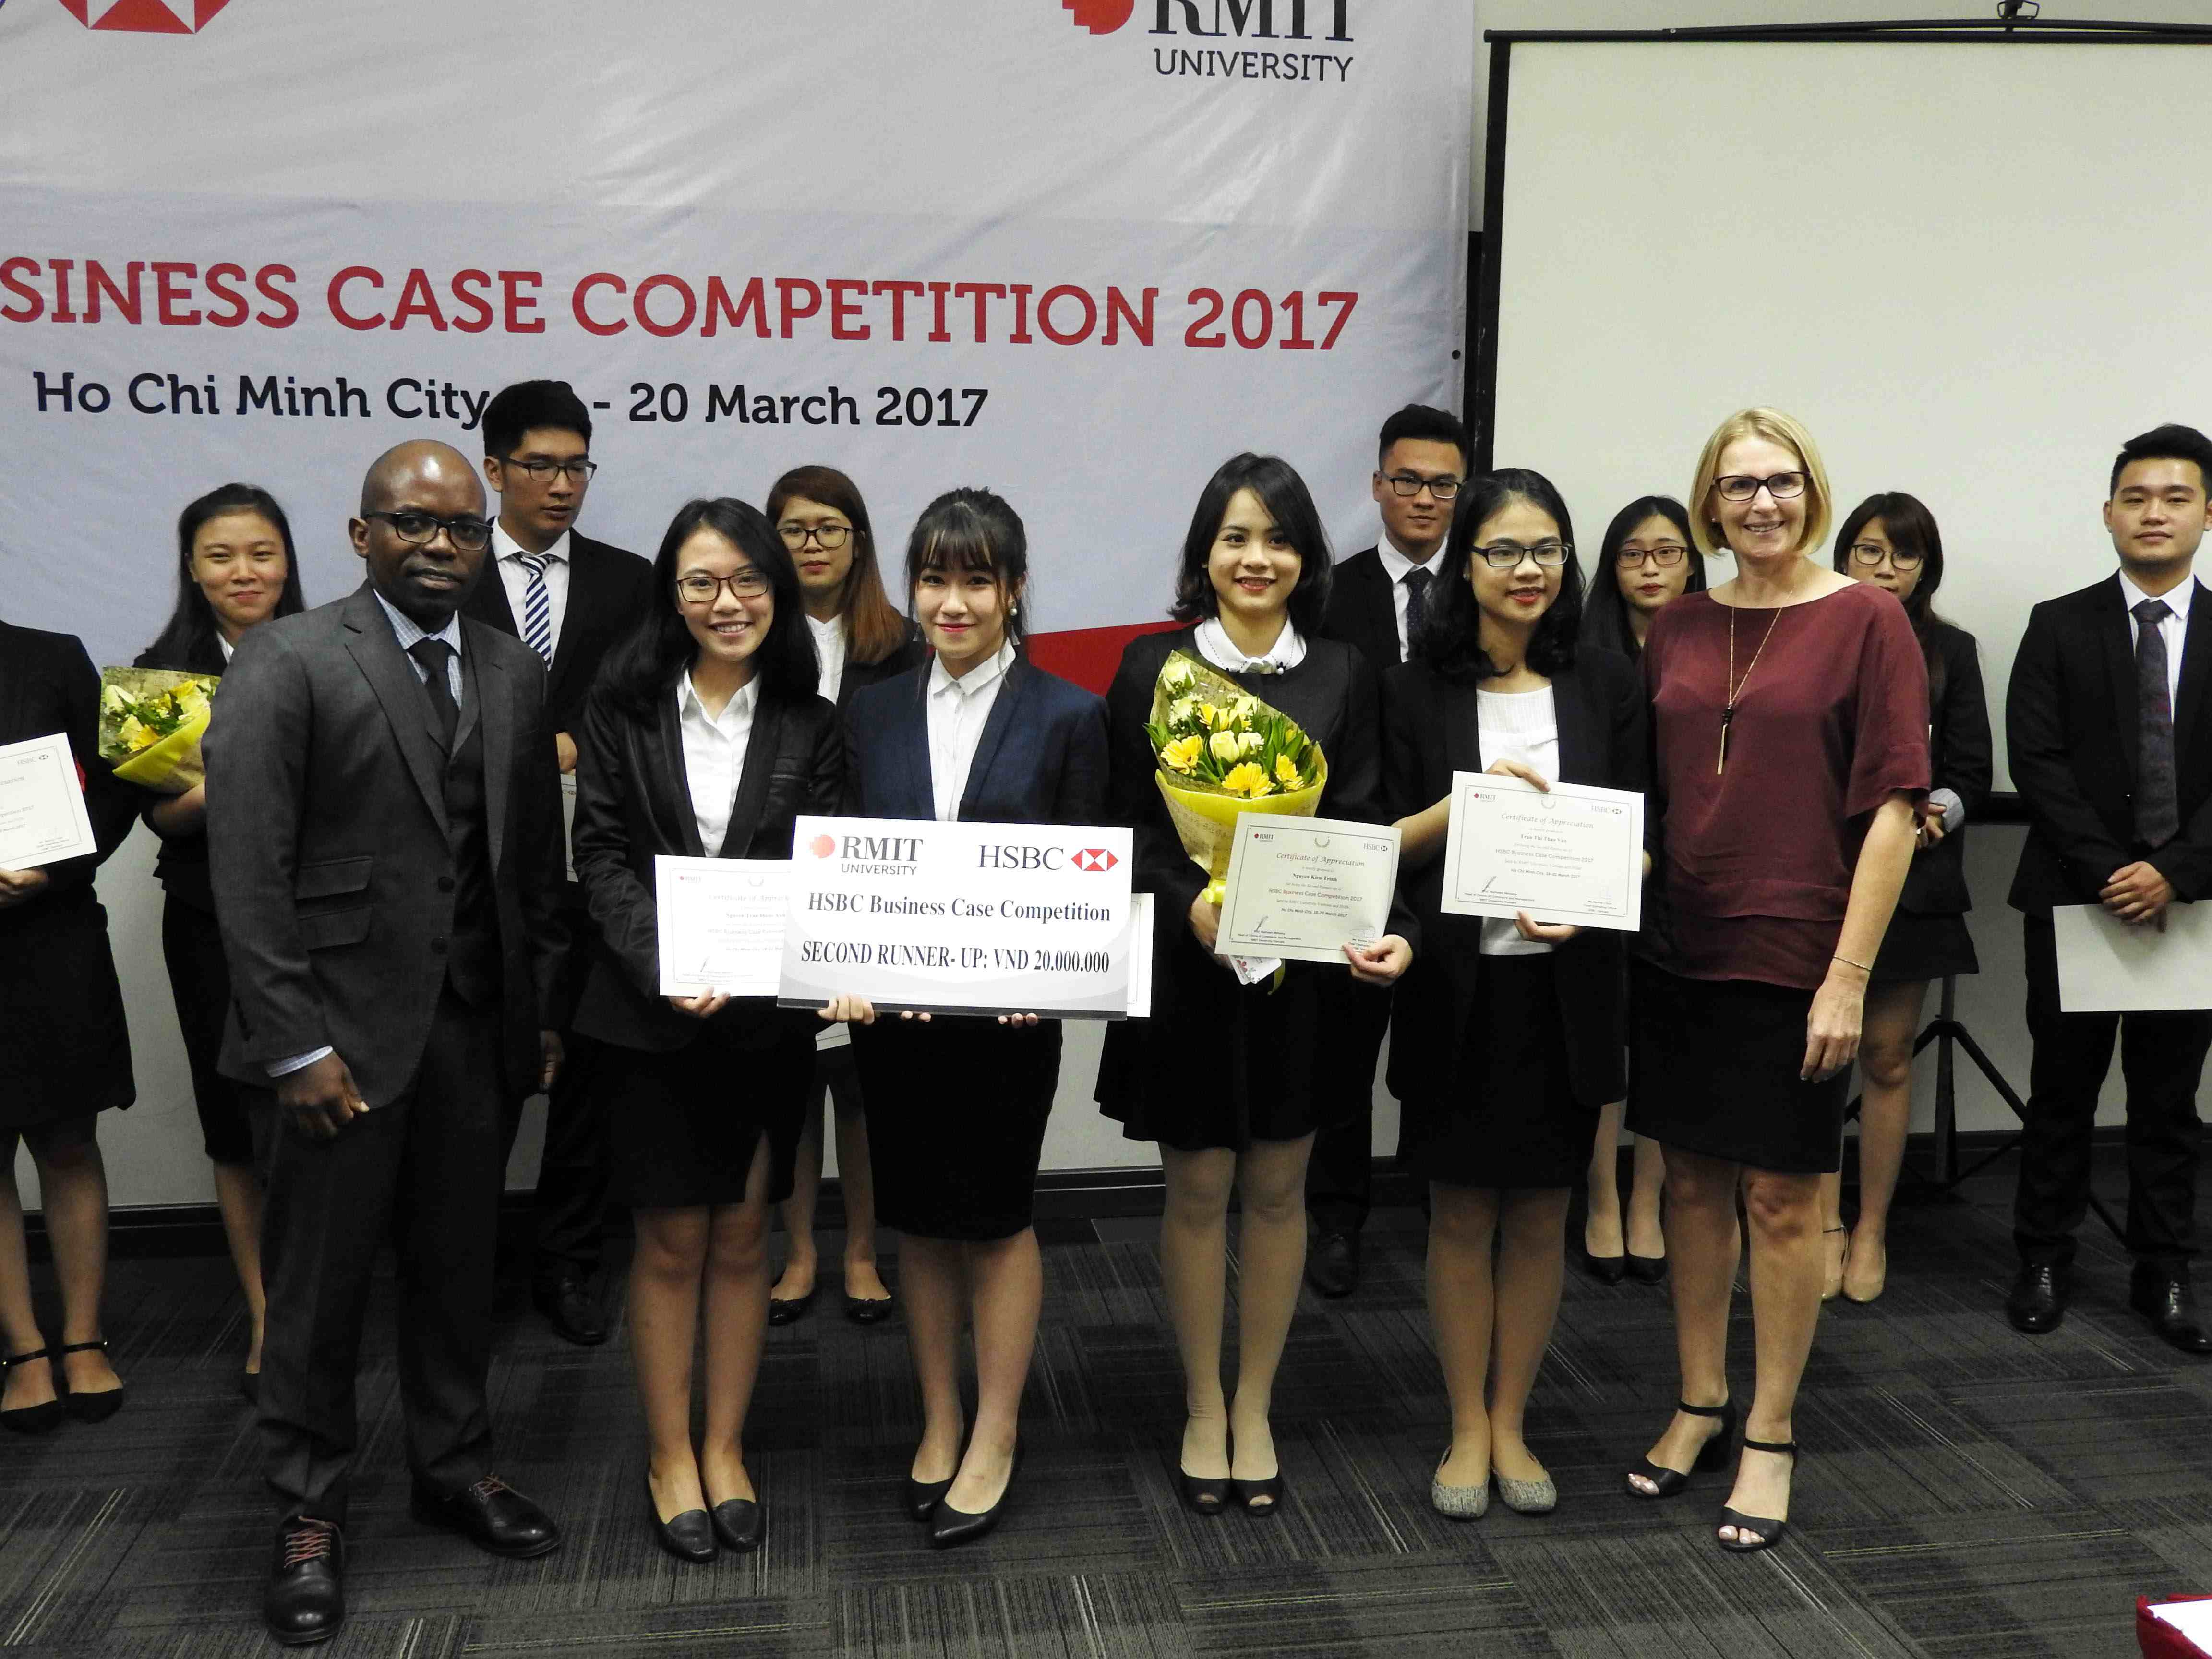 RMIT Vietnam’s Team 1997 from Hanoi City campus won third place in the competition.